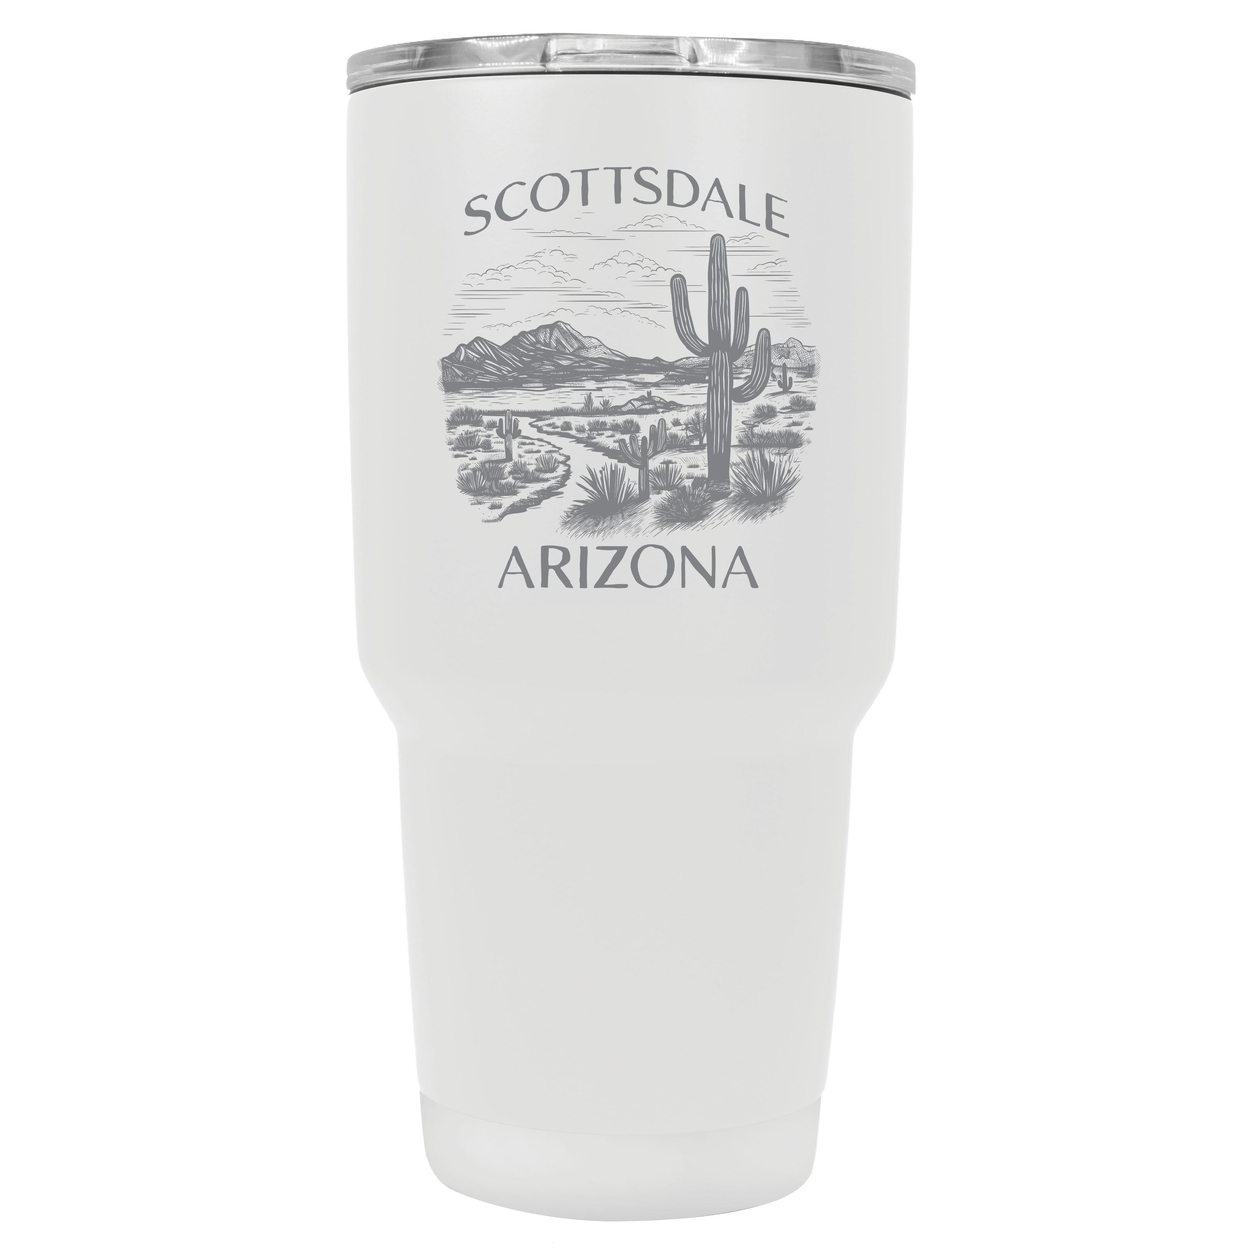 Scottsdale Arizona Souvenir 24 Oz Engraved Insulated Stainless Steel Tumbler - Rose Gold,,2-Pack